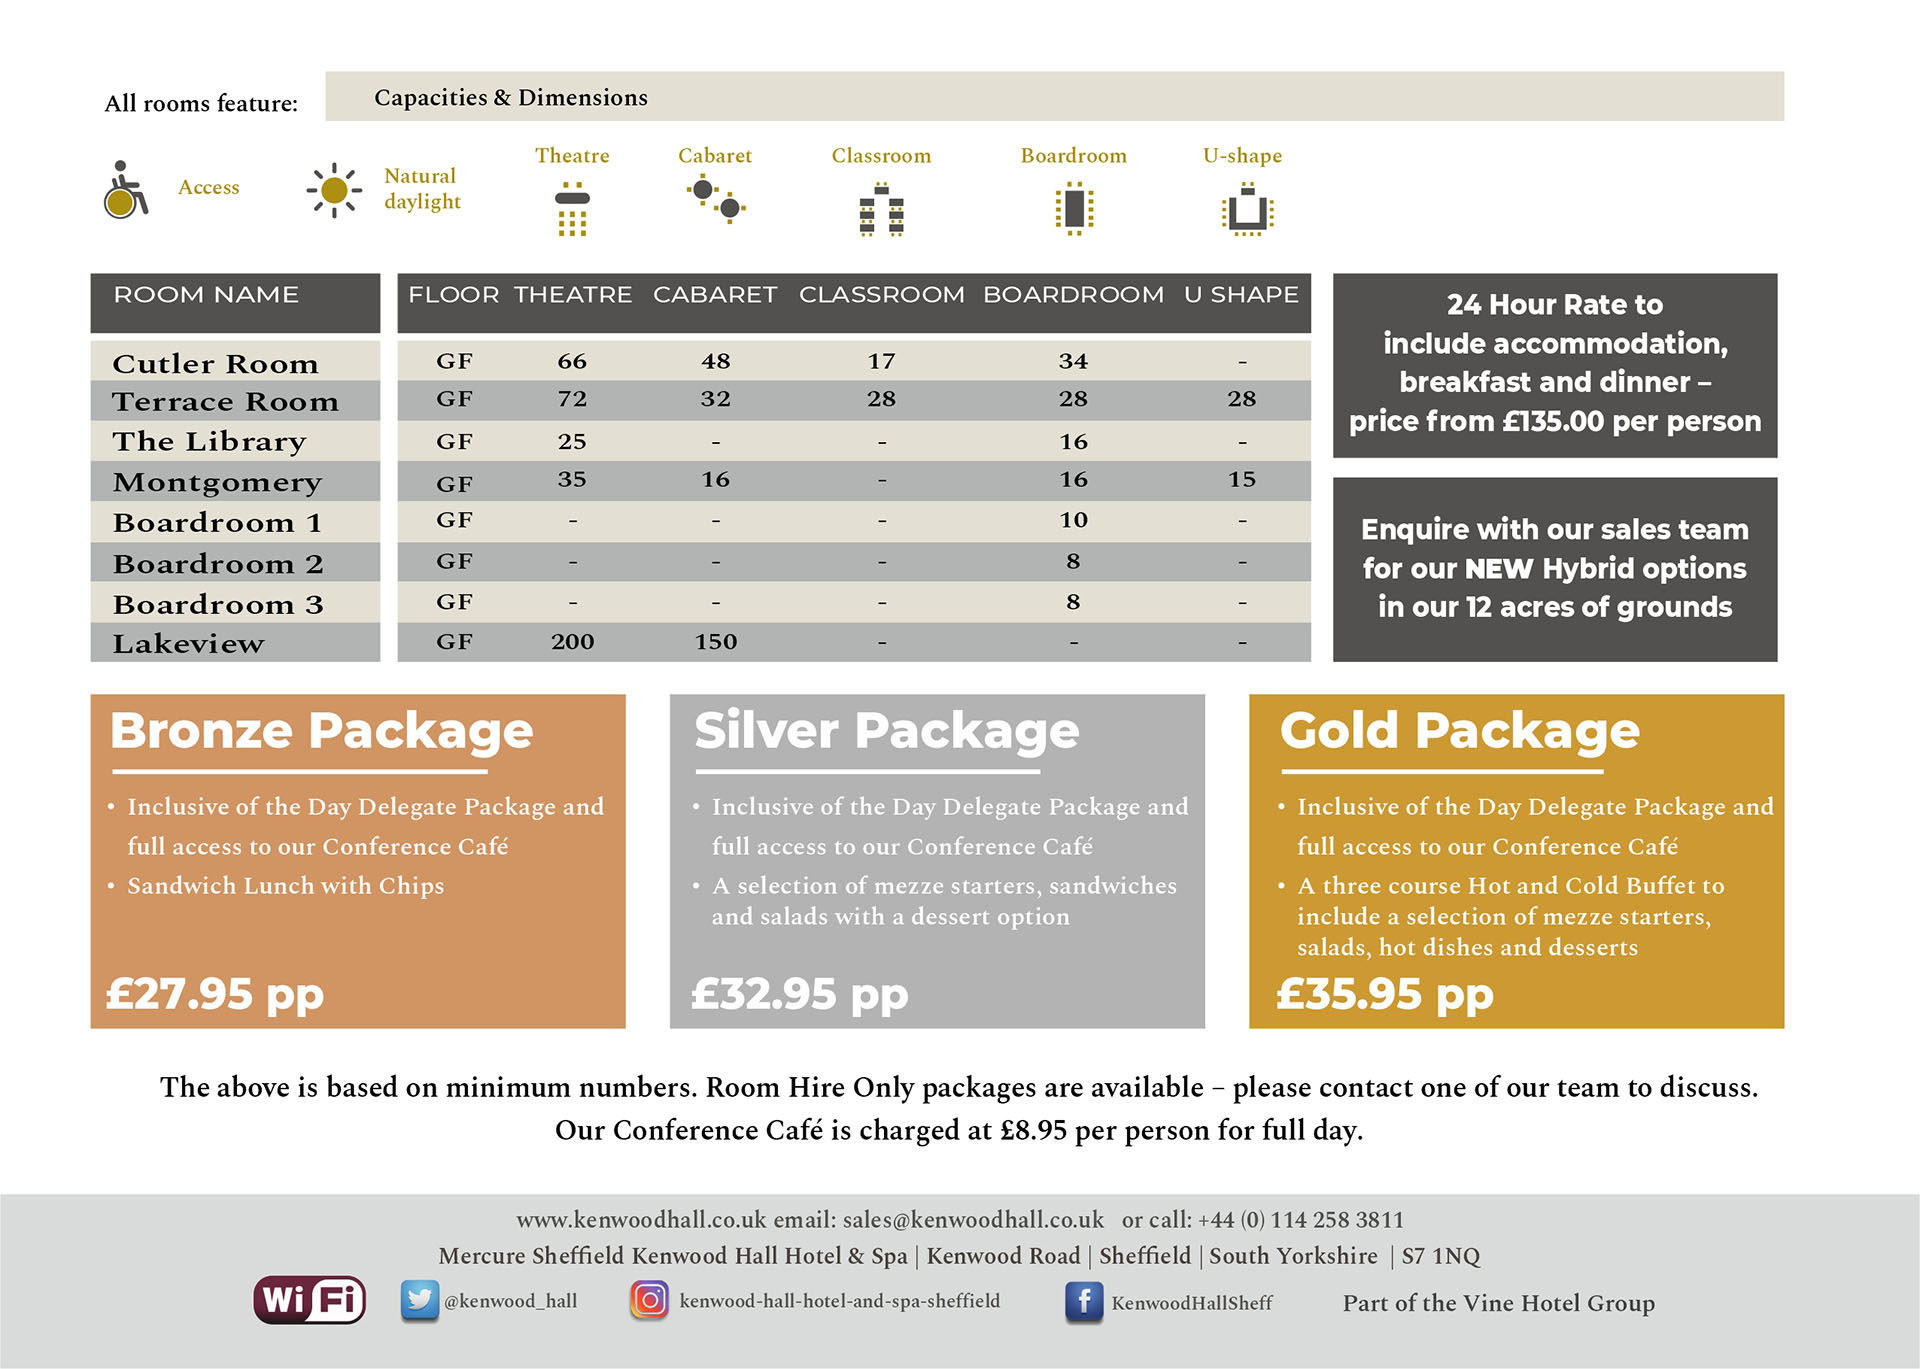 Meetings and Conferences fact sheet for Mercure Kenwood Hall Hotel & Spa Sheffield